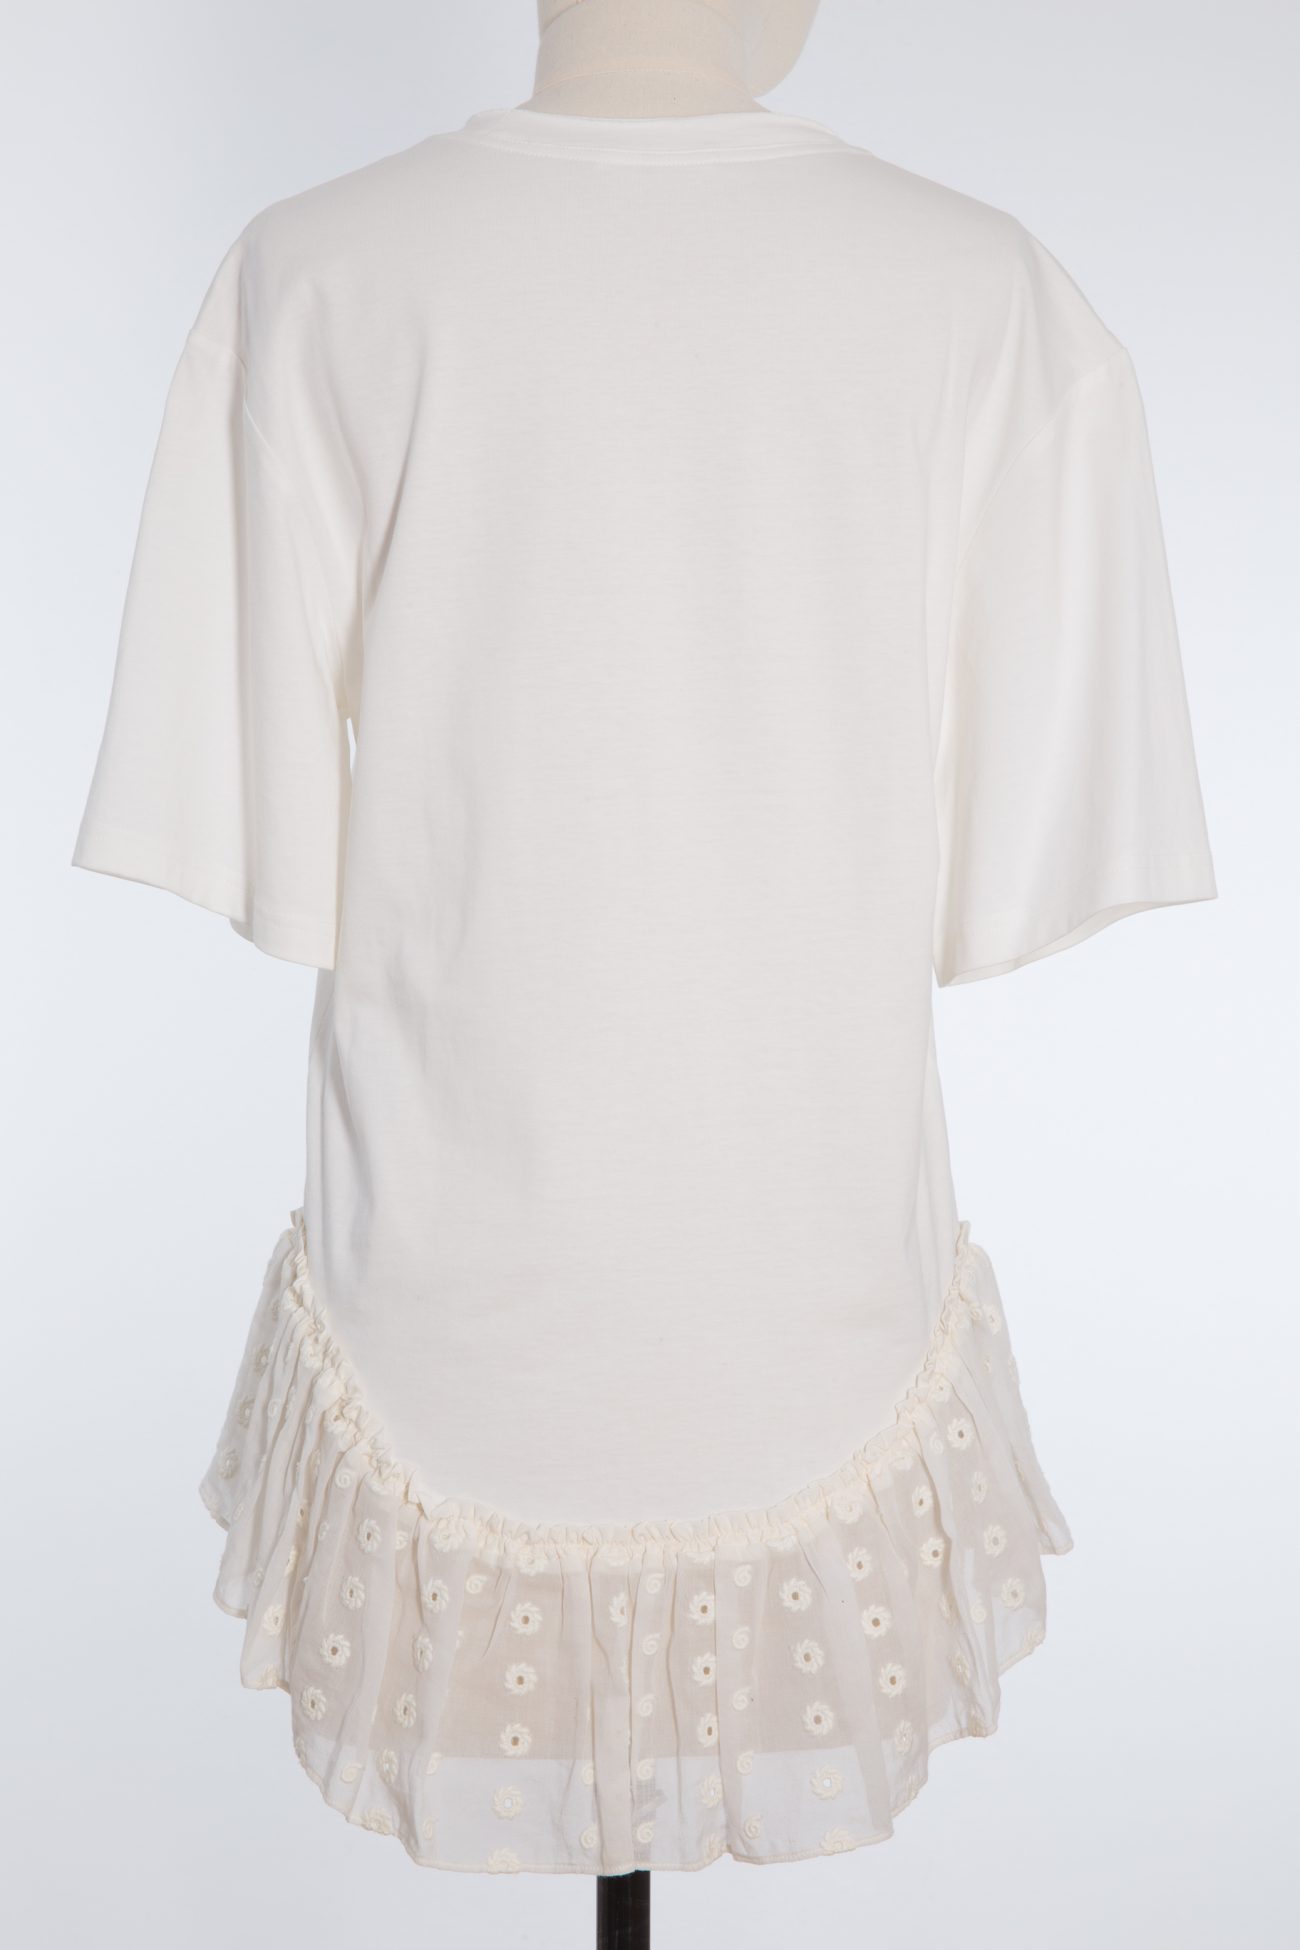 Chloe Broderie Anglaise Top